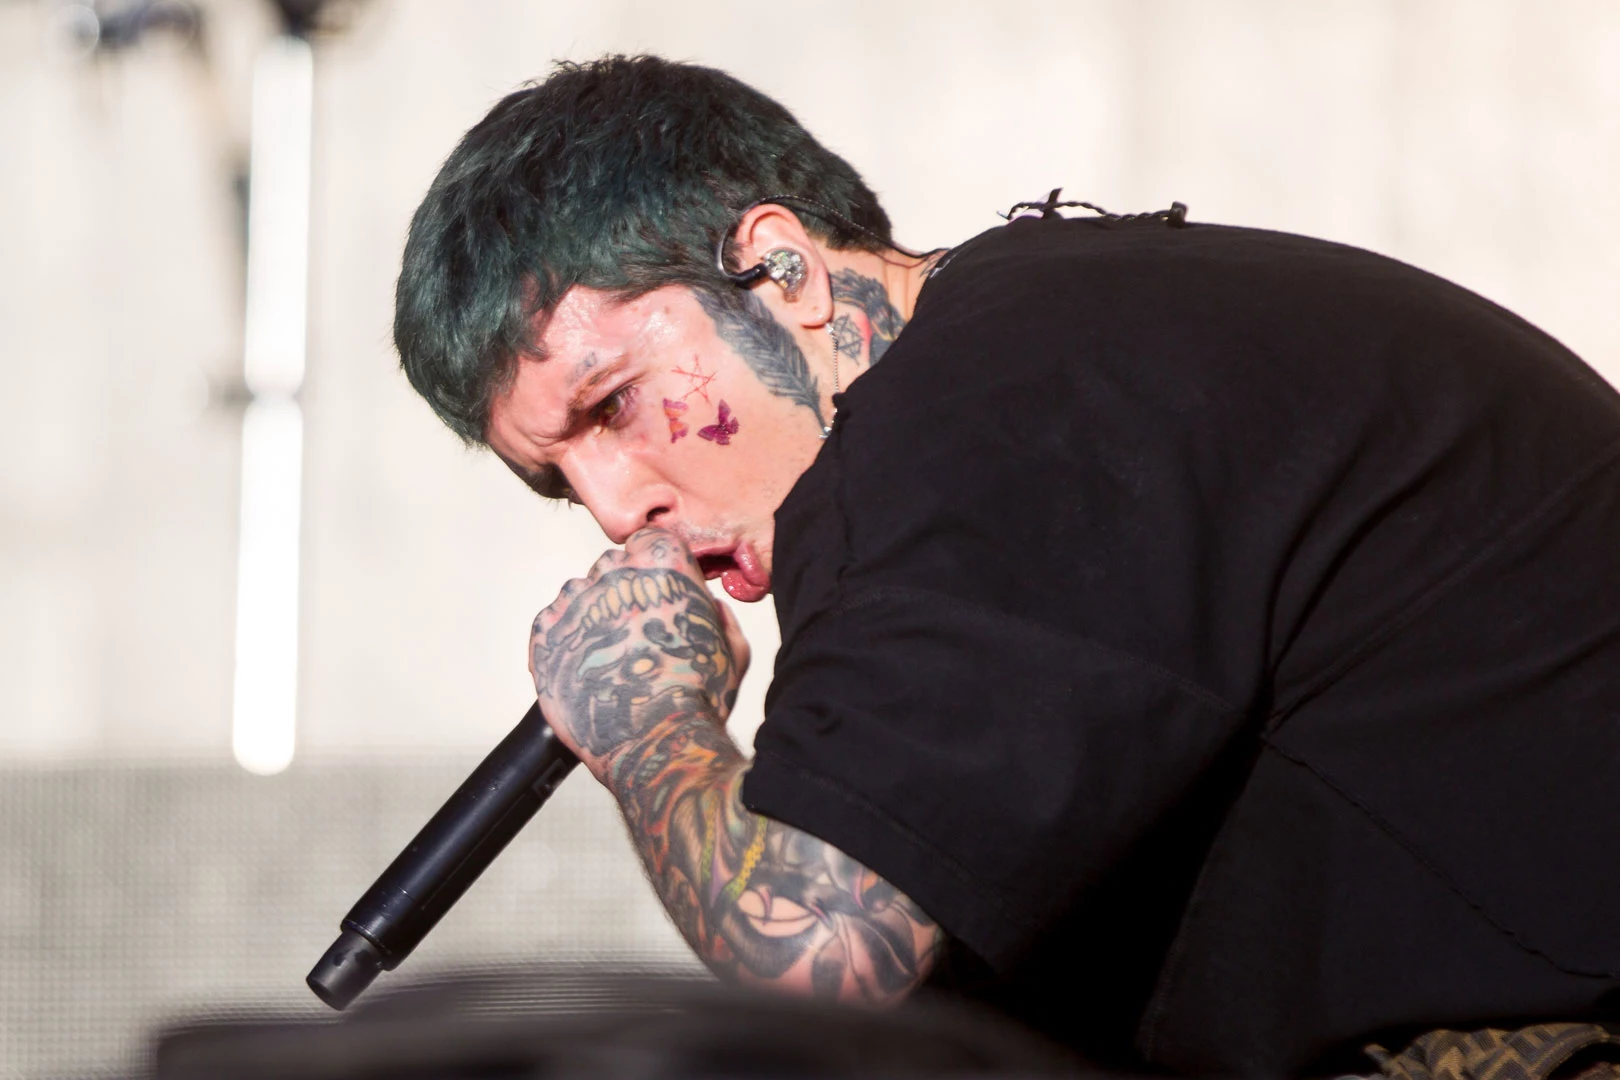 BMTH's Oli Sykes – 'I Didn't Like Myself Very Much' Over Lockdown